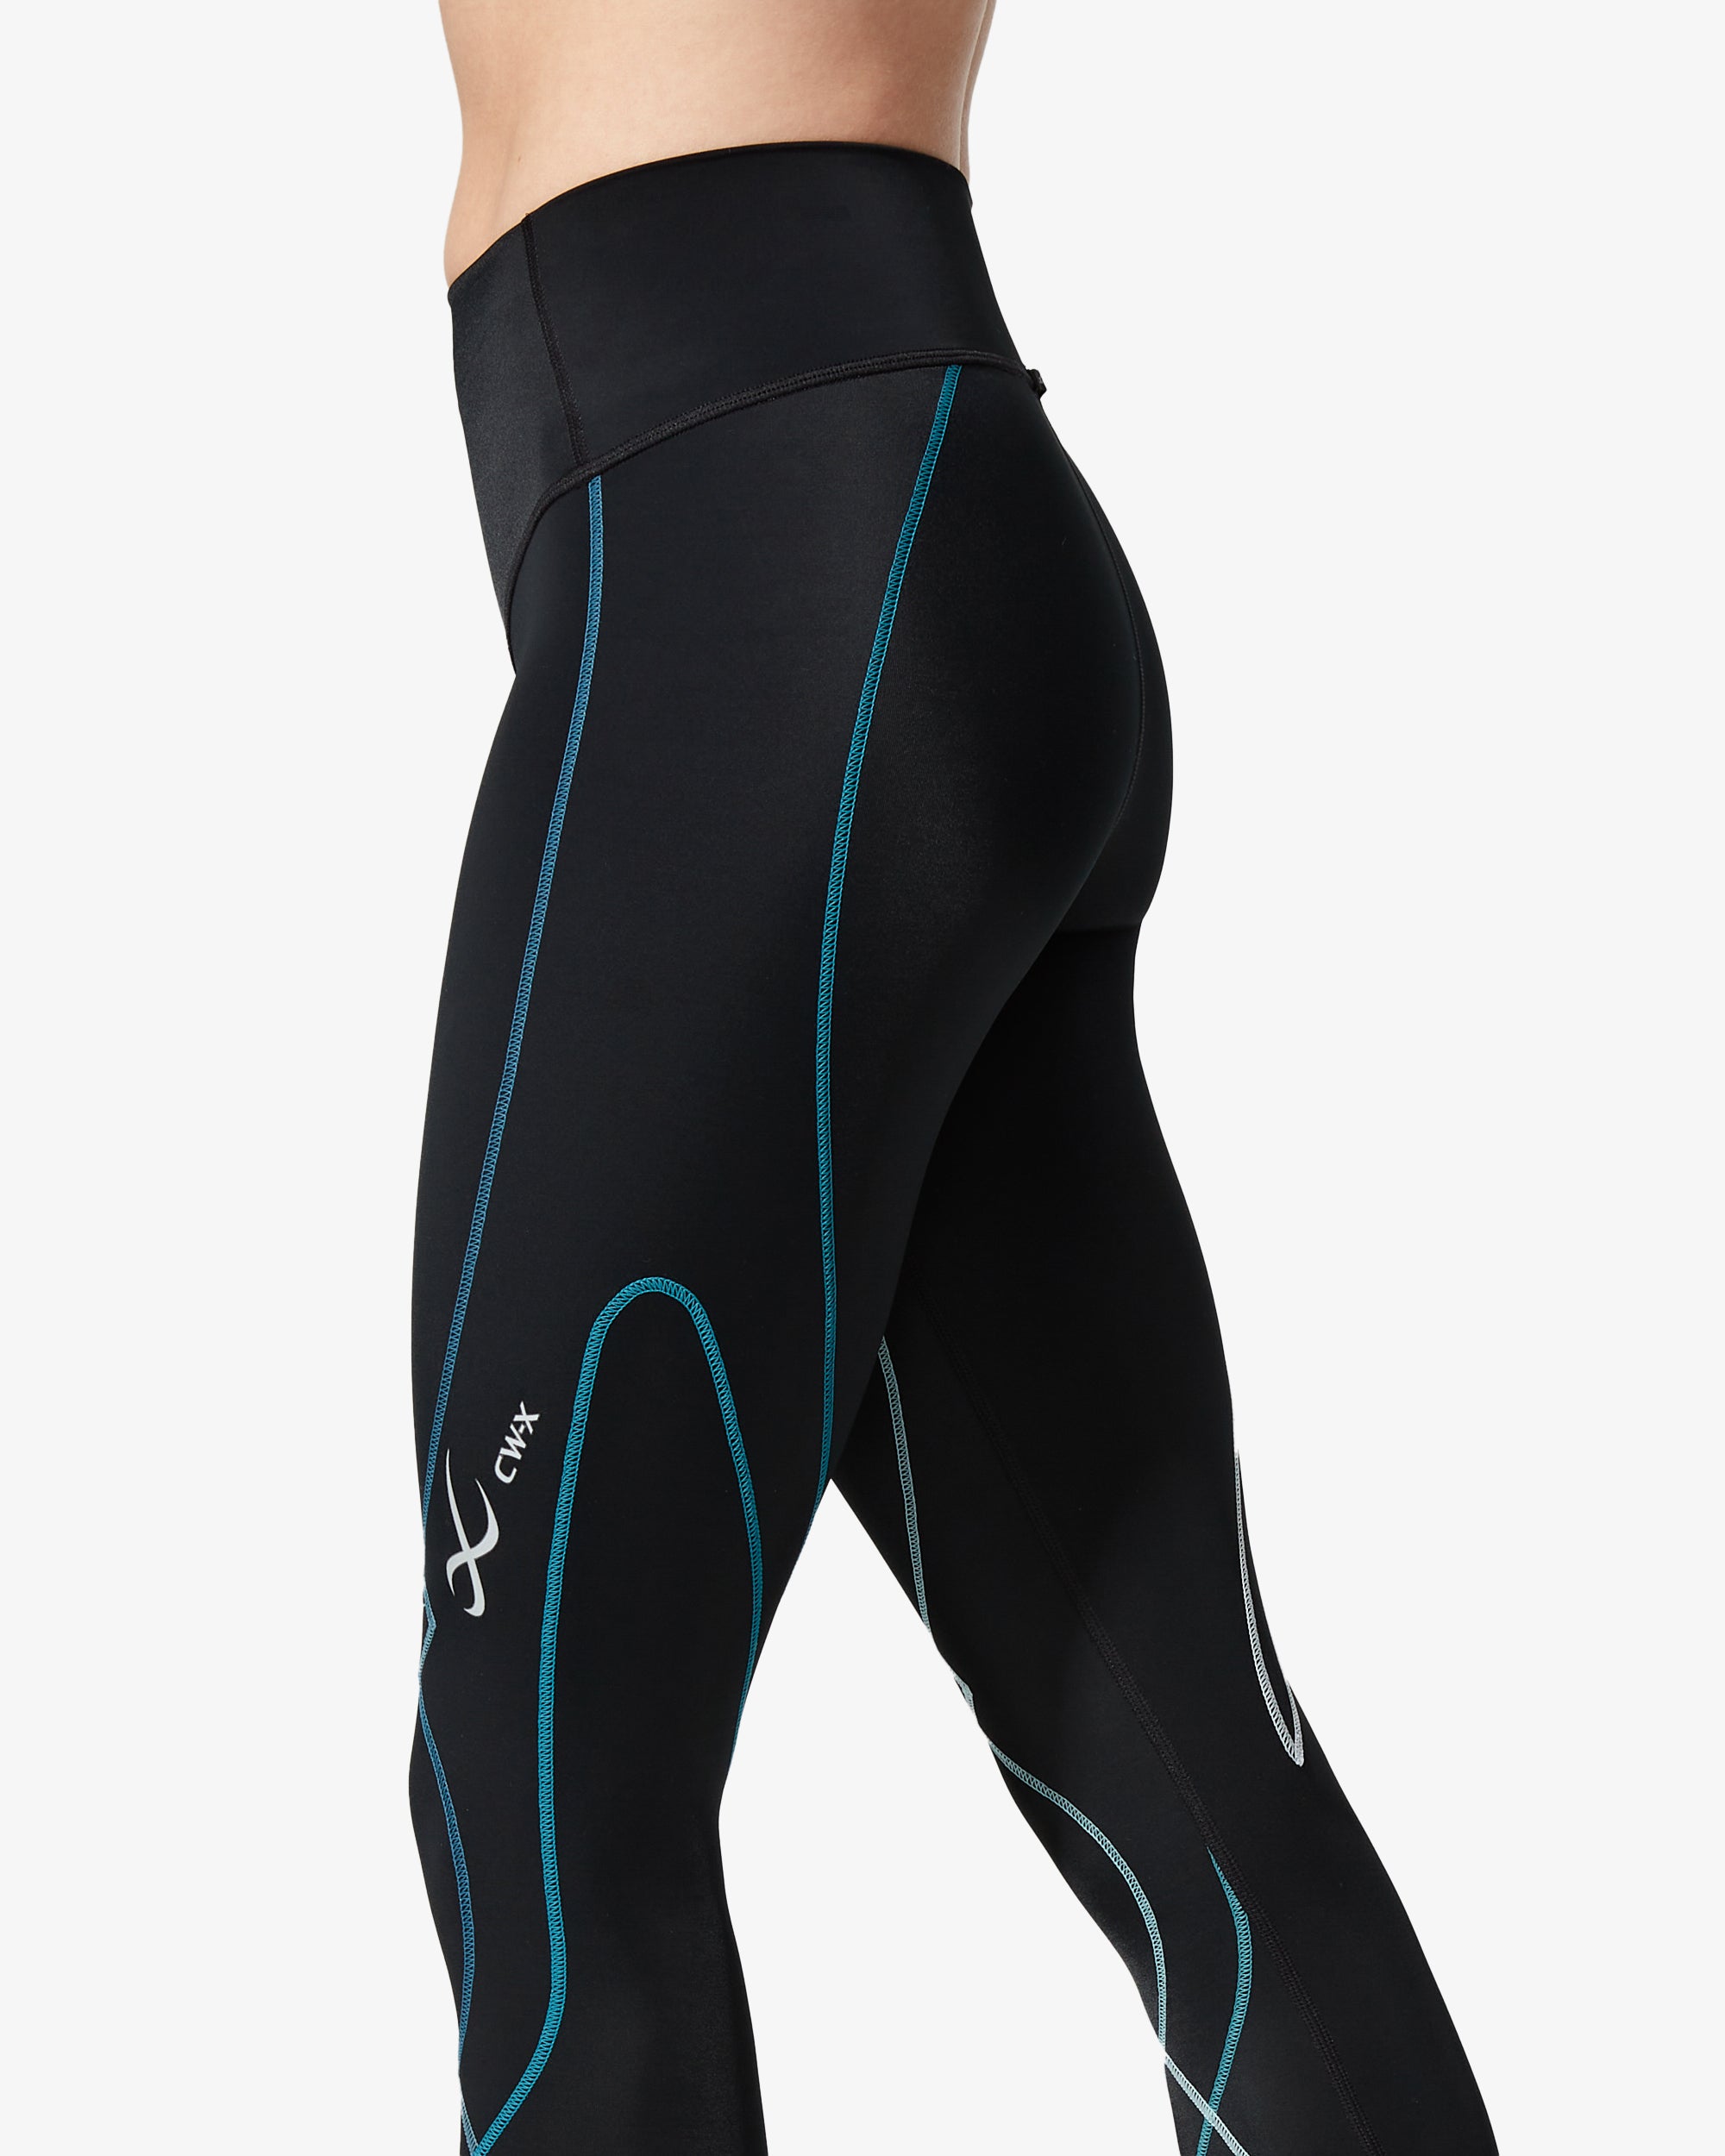 Climb for days in CW-X Stabilyx Joint Support Compression Tights